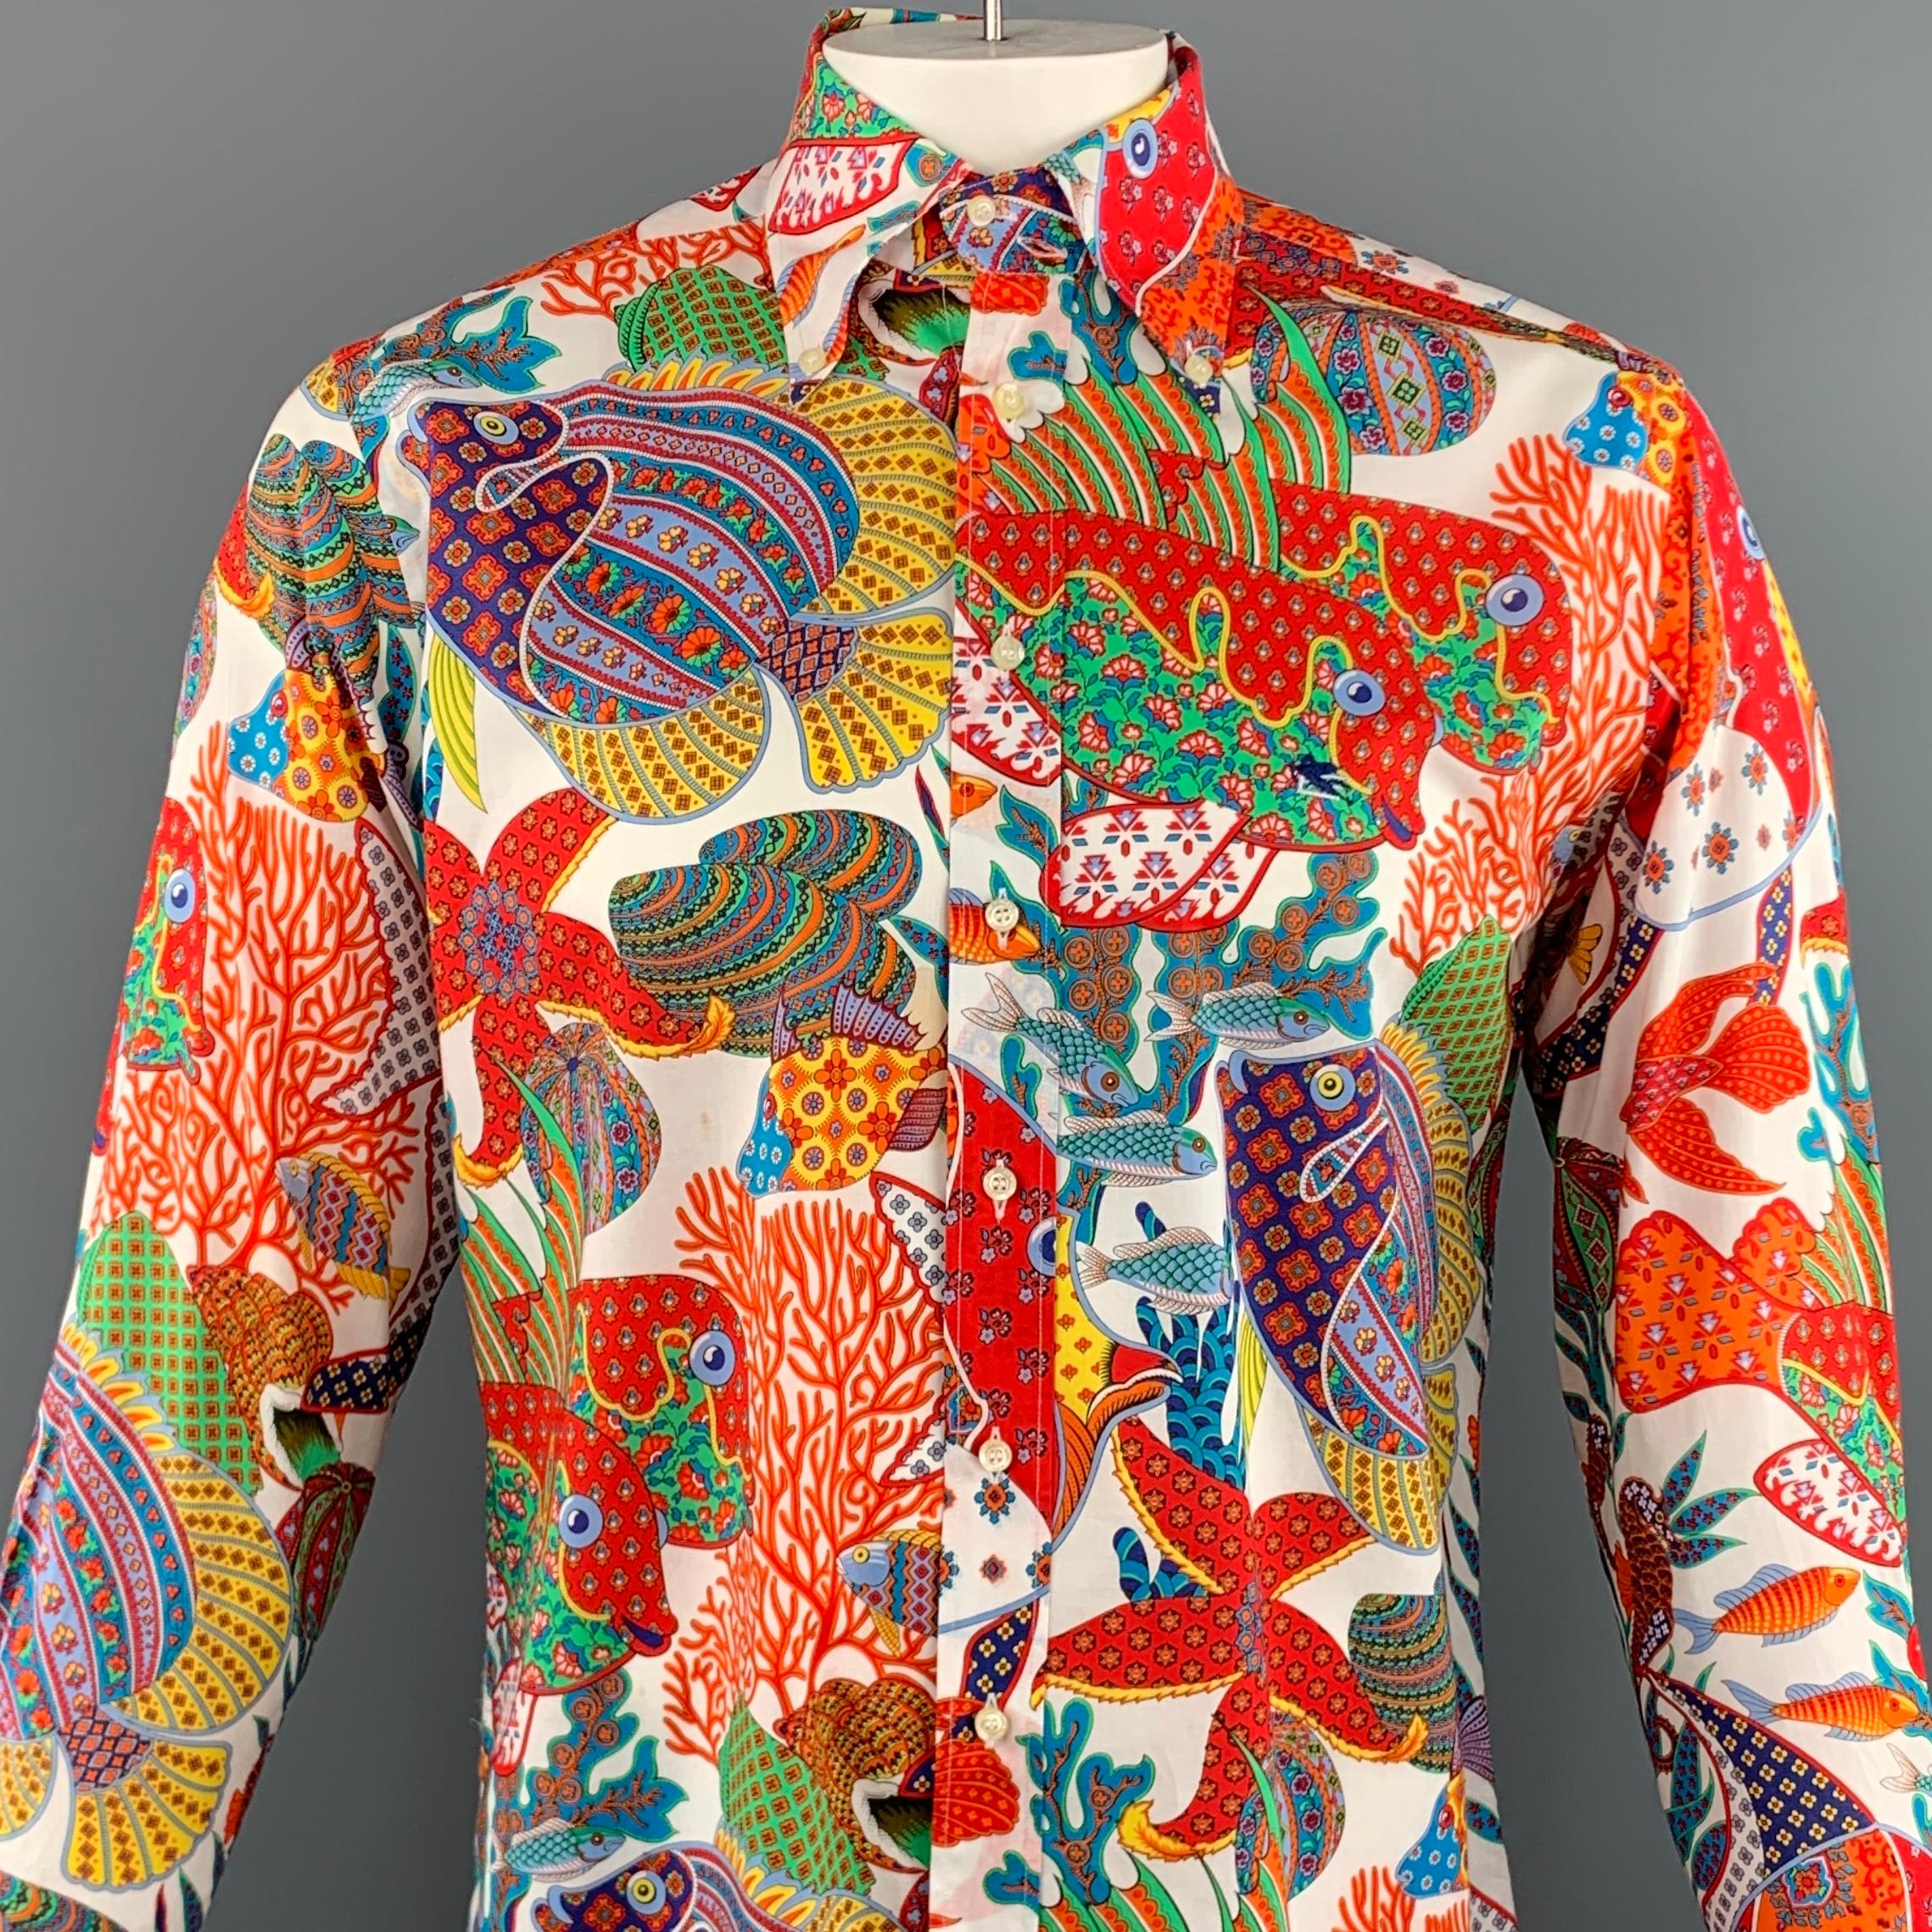 ETRO long sleeve shirt comes in a multi-color cotton featuring a abstract fish print throughout. button down style and a pointed collar. Made in Italy.
 
Excellent Pre-Owned Condition.
Marked: 41
 
Measurements:
 
Shoulder: 18 in.
Chest: 48